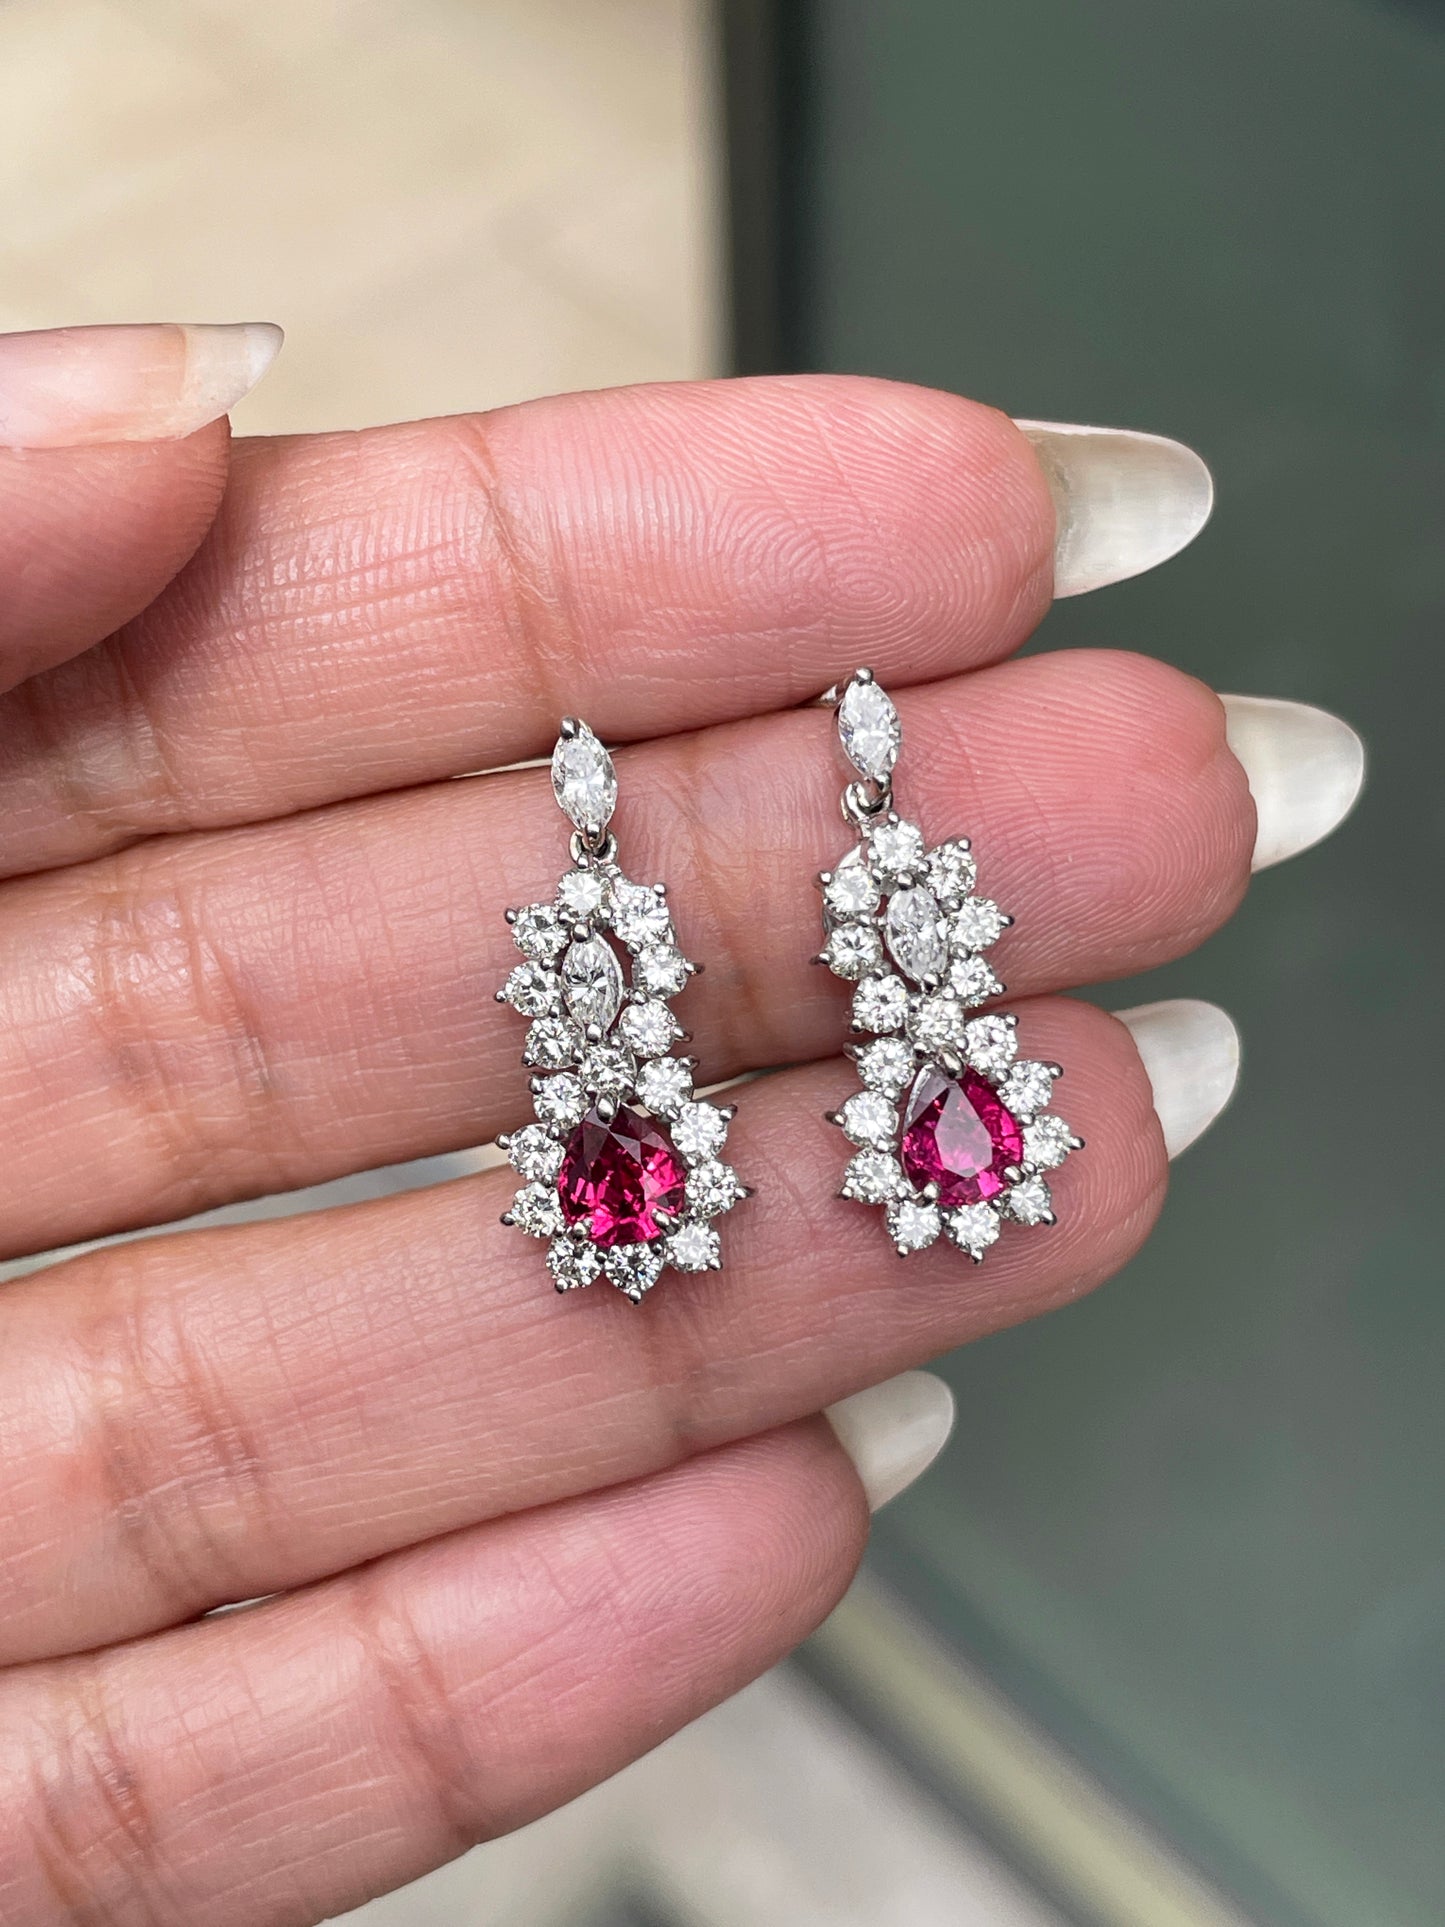 Ruby and Diamond 18 Carat White Gold Cluster Earrings